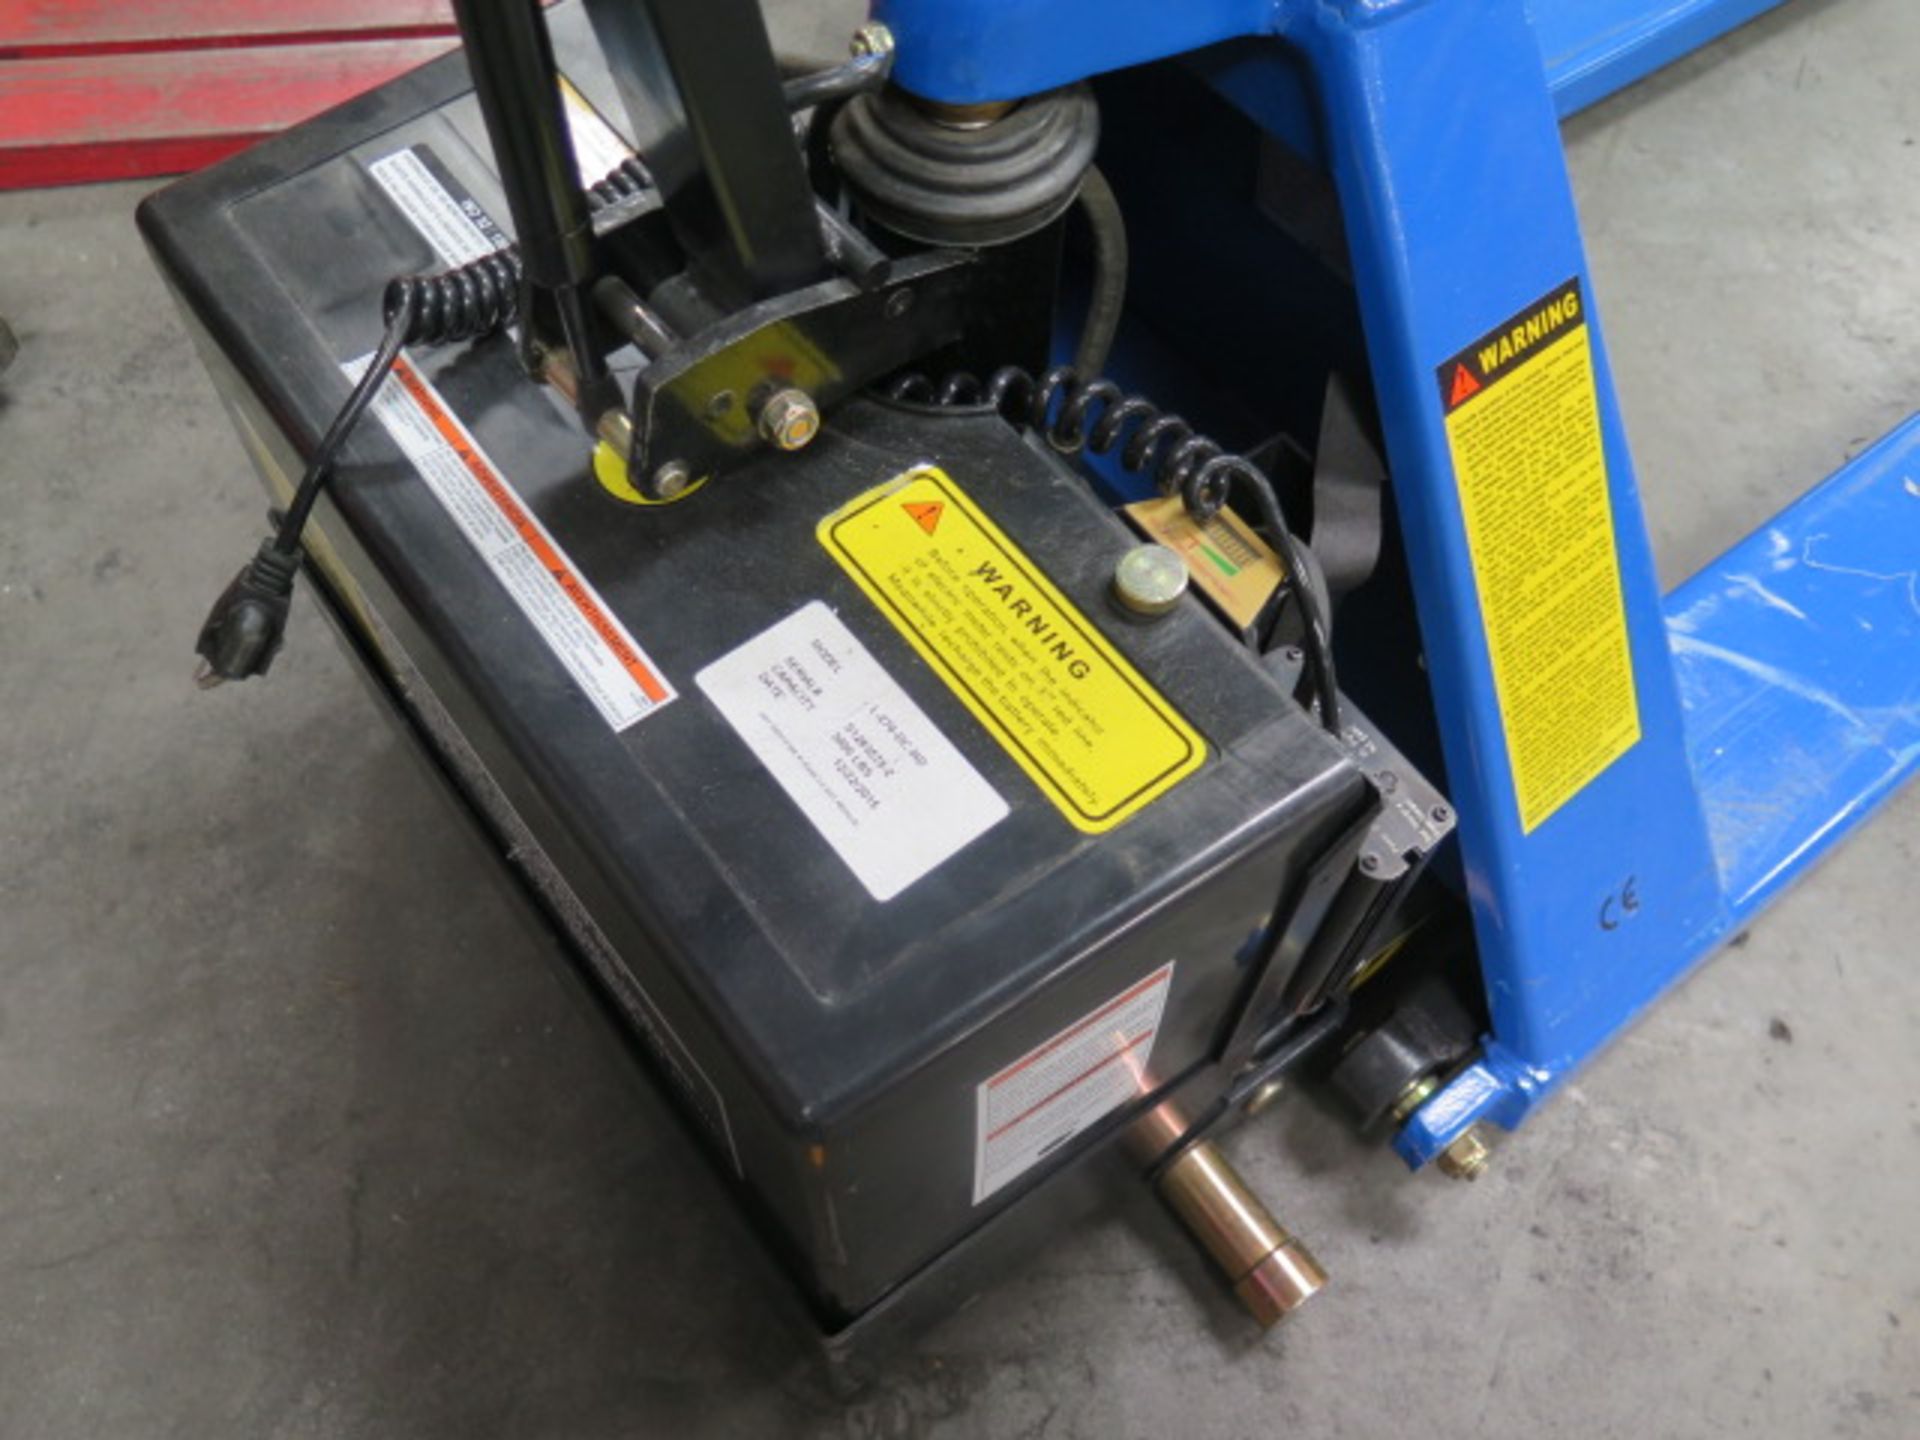 2015 Import mdl L-270-DC-HD 3000 Lb Cap Electric Pallet Jack w/ Built-In Charger, SOLD AS IS - Image 4 of 8